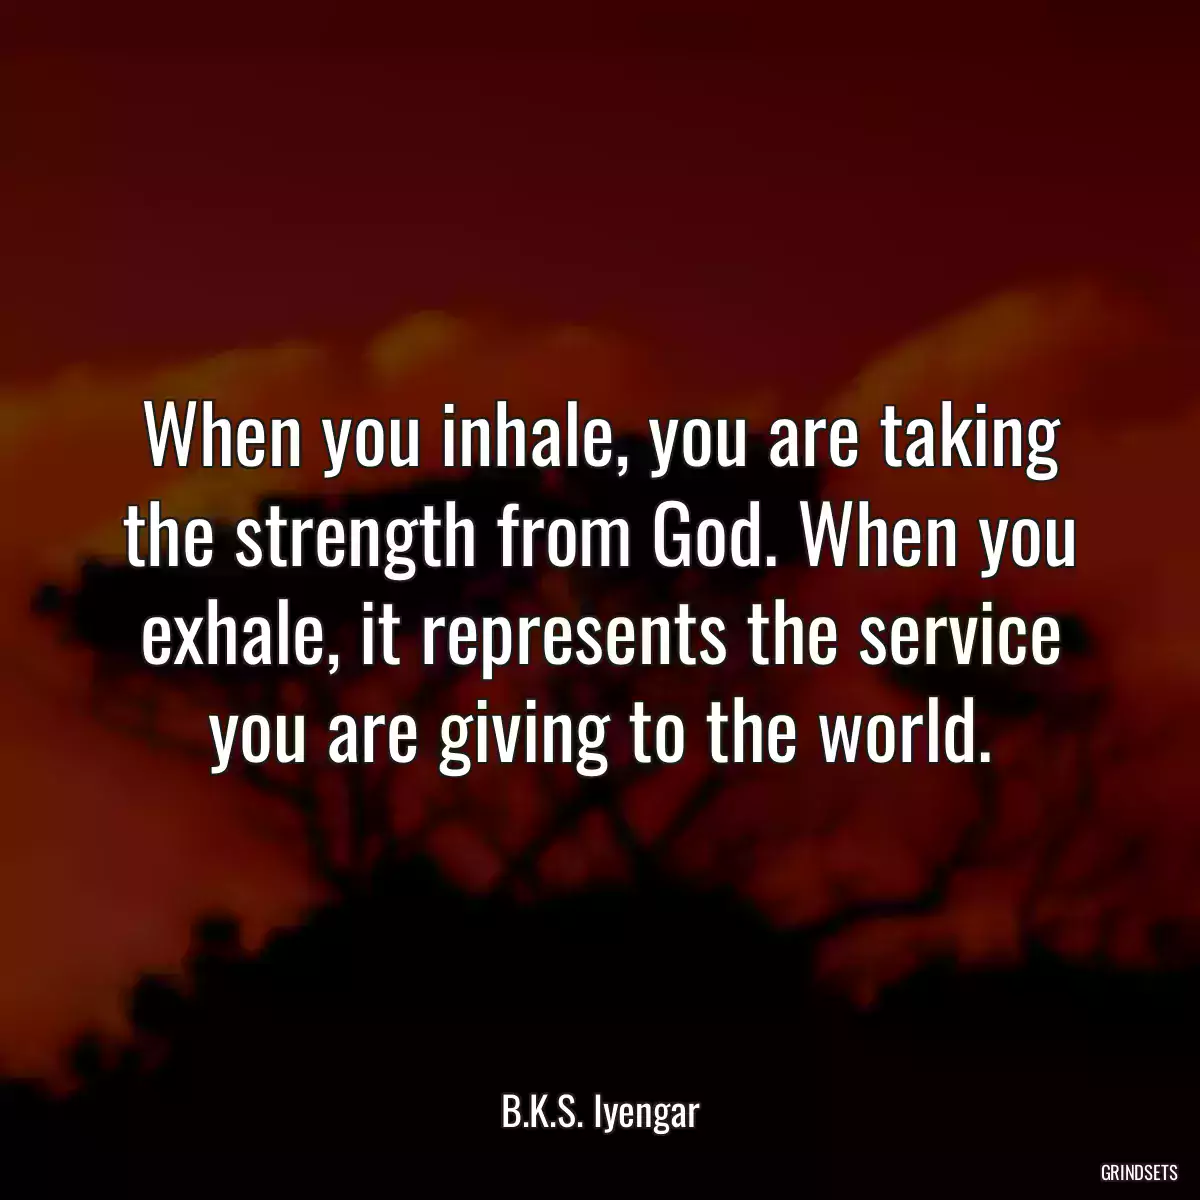 When you inhale, you are taking the strength from God. When you exhale, it represents the service you are giving to the world.